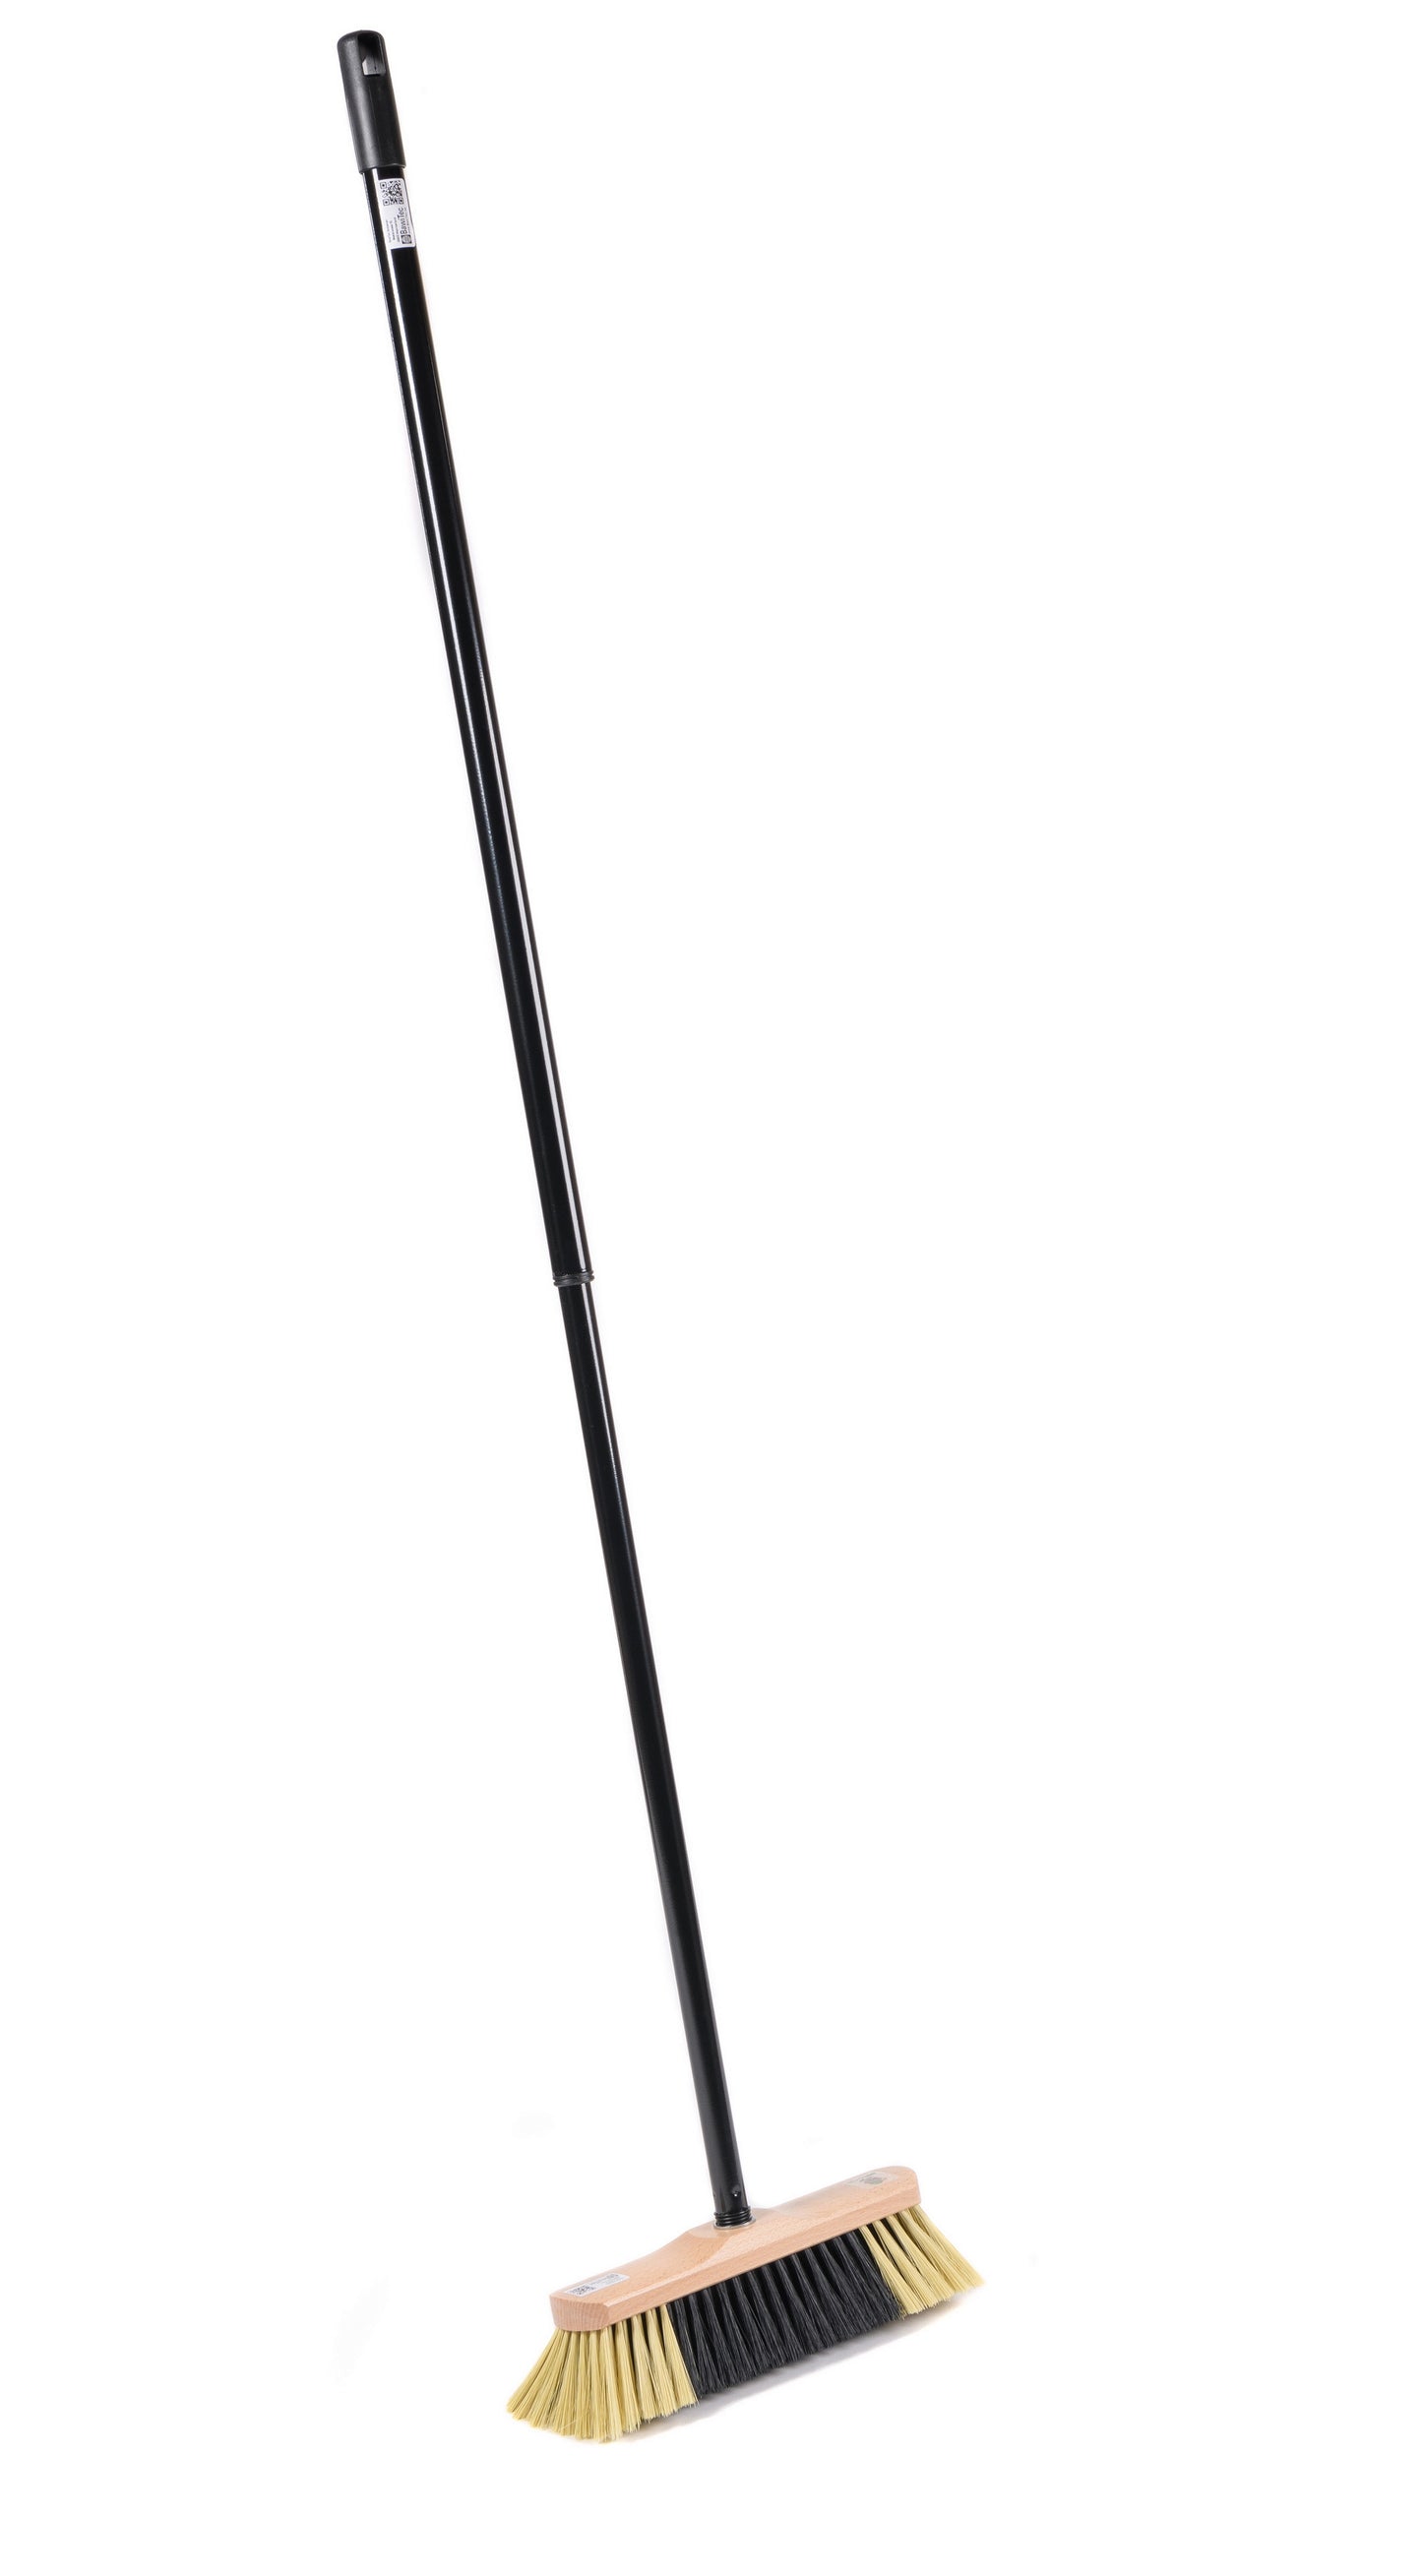 Room broom 30cm painted with telescopic handle adjustable length 130cm